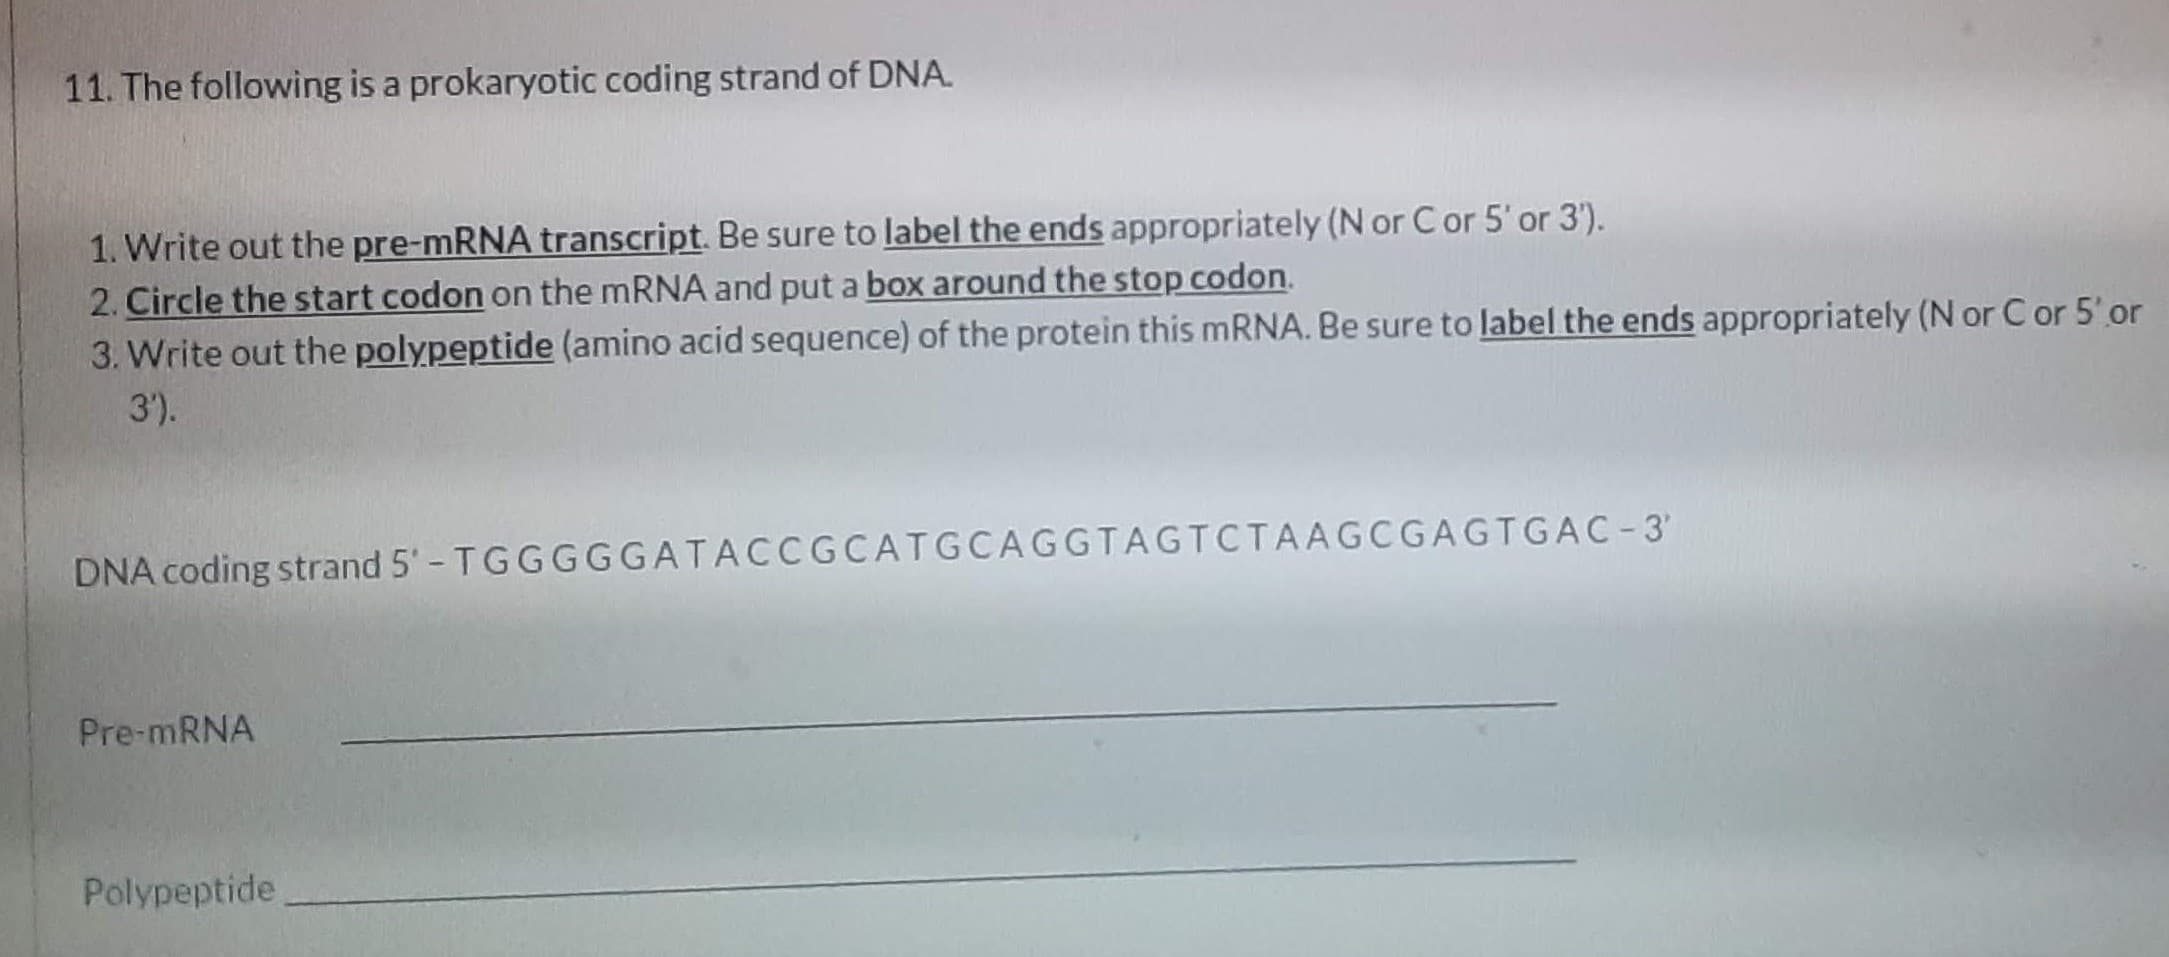 11. The following is a prokaryotic coding strand of DNA.
1. Write out the pre-MRNA transcript. Be sure to label the ends appropriately (N or C or 5' or 3').
2. Circle the start codon on the MRNA and put a box around the stop codon.
3. Write out the polypeptide (amino acid sequence) of the protein this MRNA. Be sure to label the ends appropriately (N or C or 5'or
3').
DNA coding strand 5'- TGGGGGATACCGCATGCAGGTAGTCTAAGCGAGTGAC - 3'
Pre-mRNA
Polypeptide
